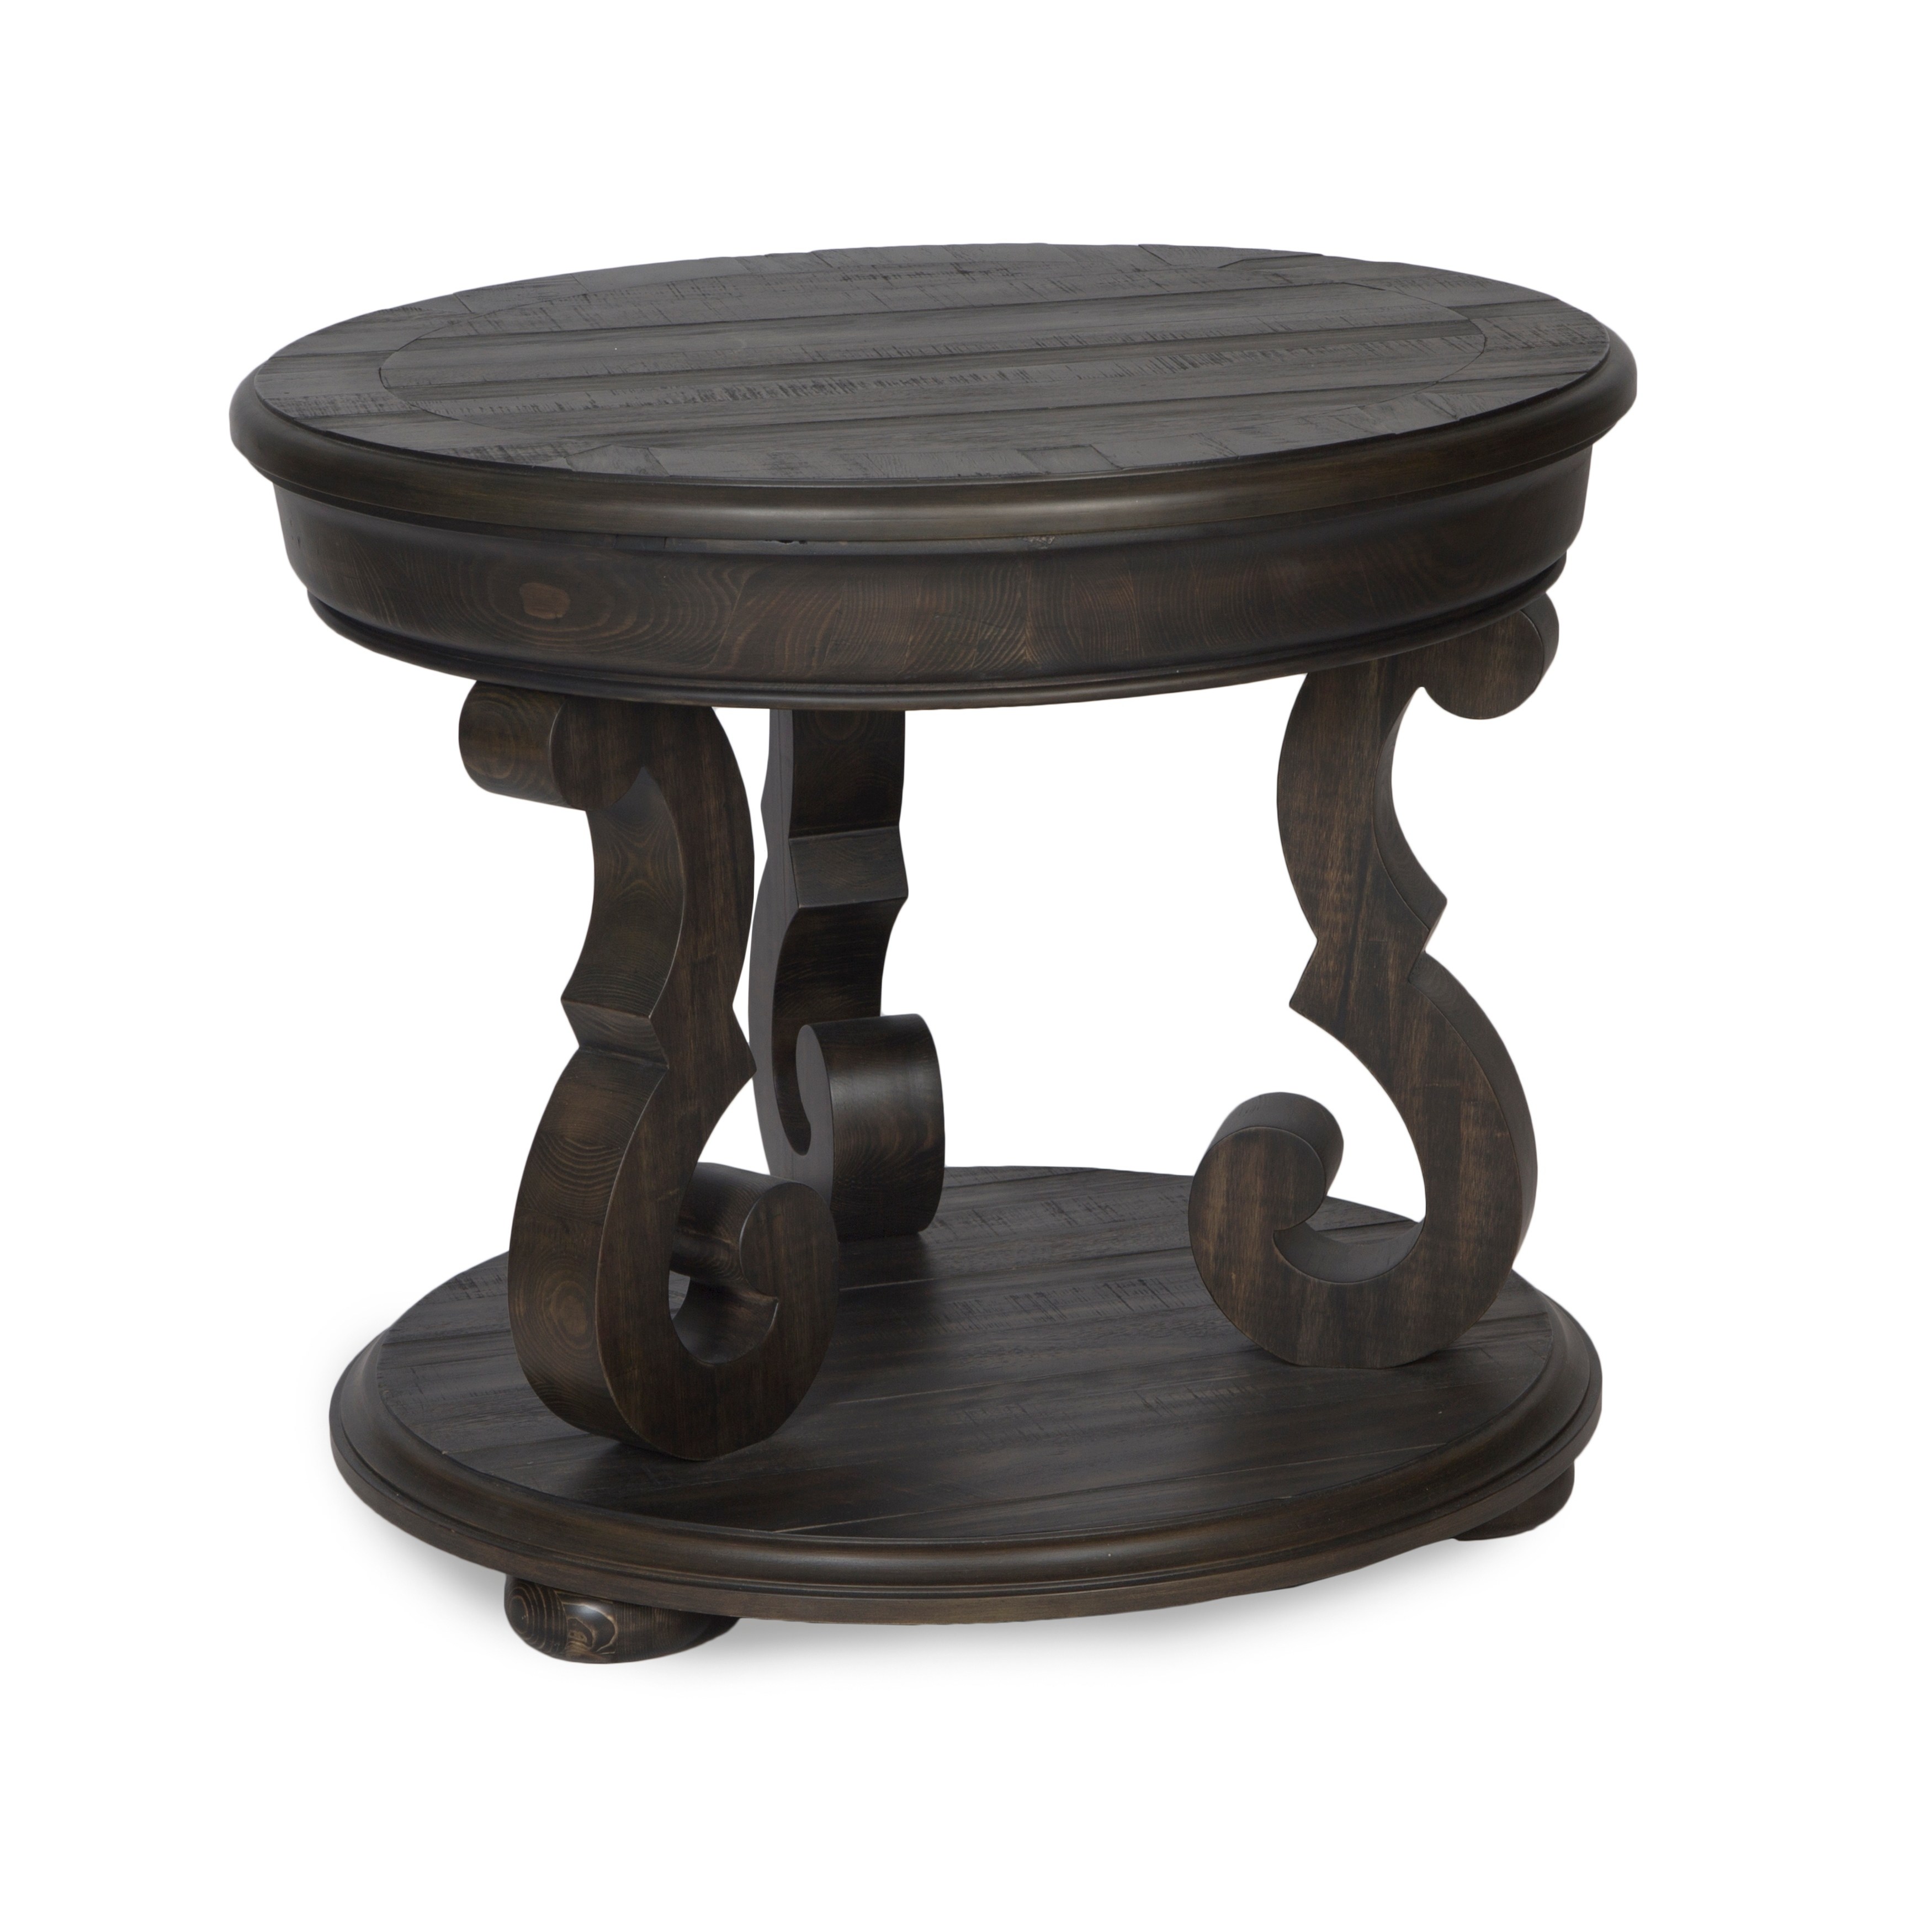 florence traditional distressed charcoal rustic round accent table free shipping today inch tablecloth navy blue side glass plastic frame wood end tables with drawers parsons